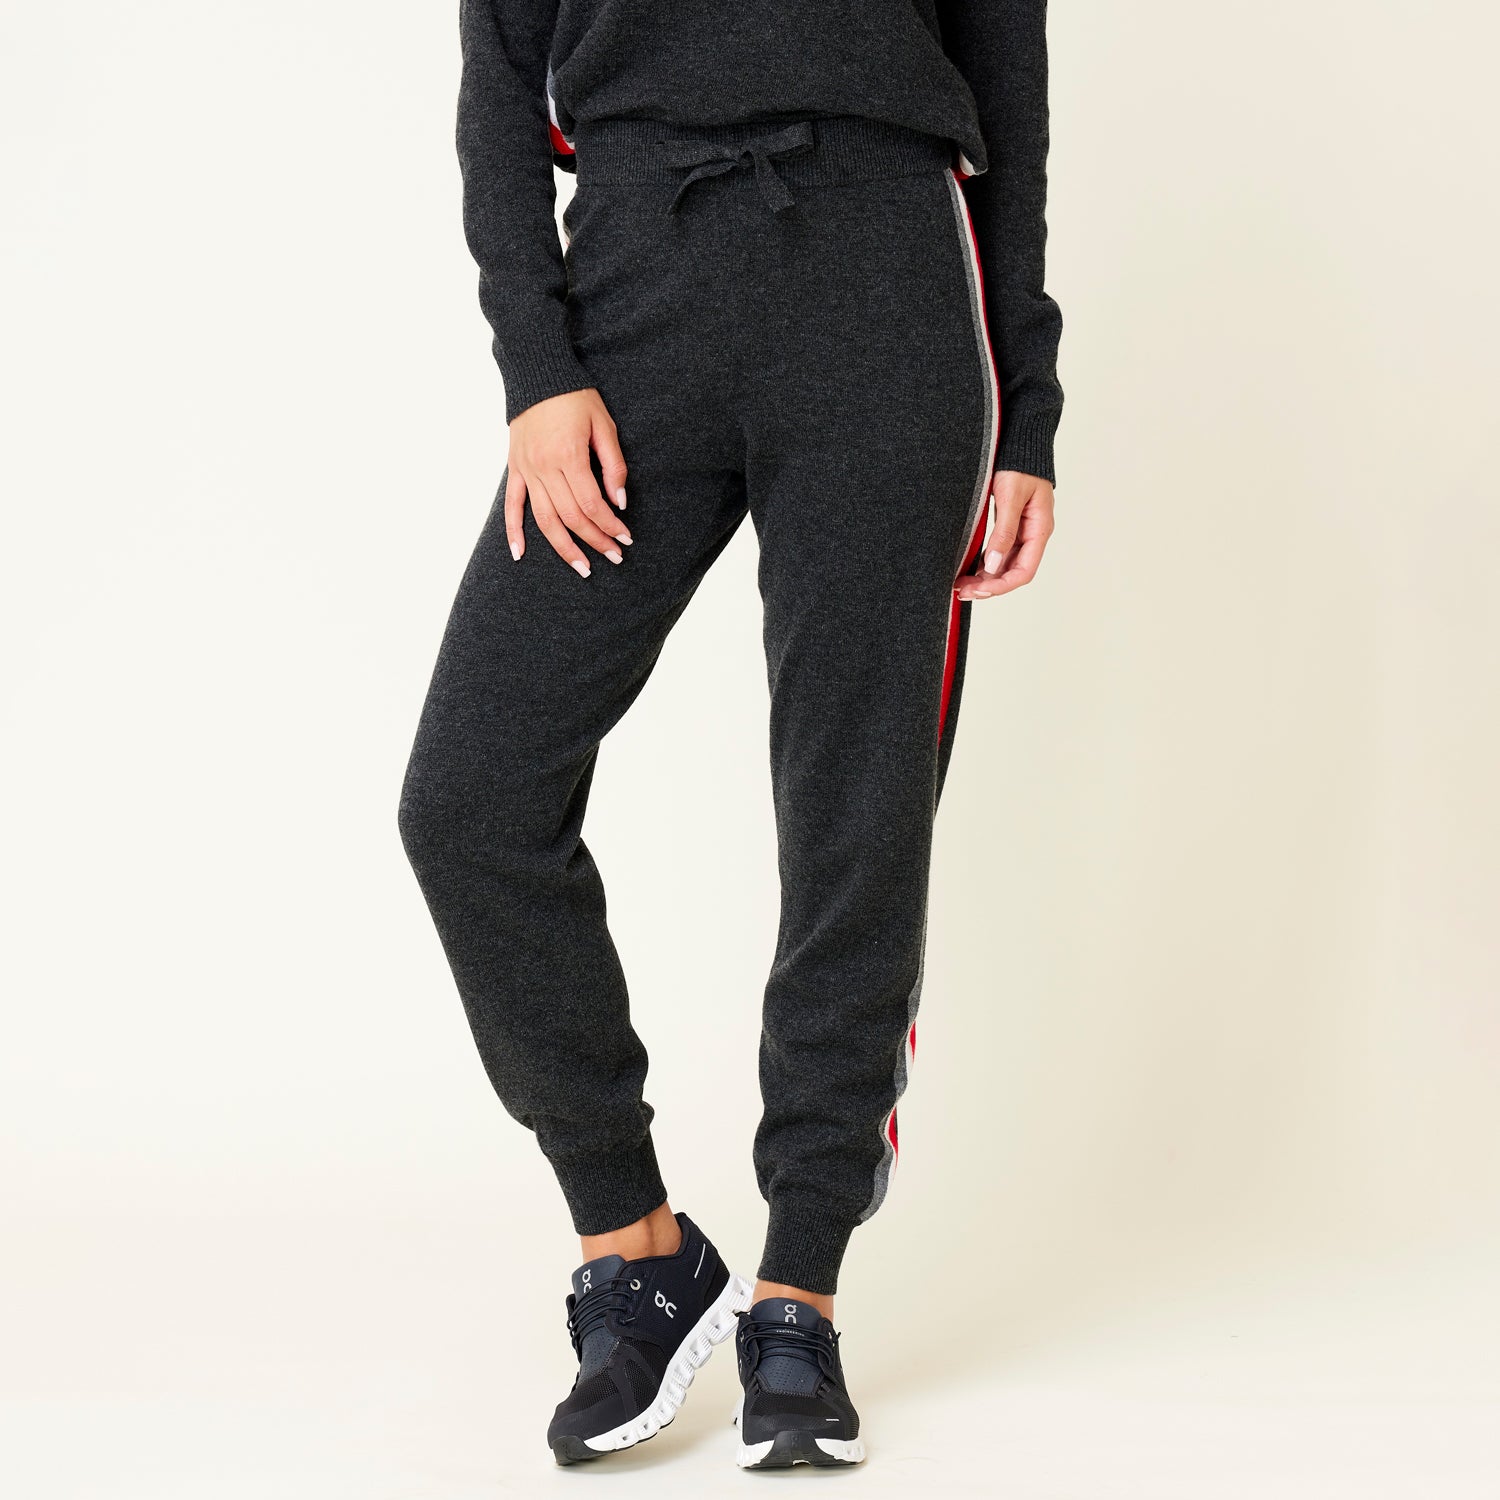 Brooklyn Pure Cashmere Joggers. Not Monday.